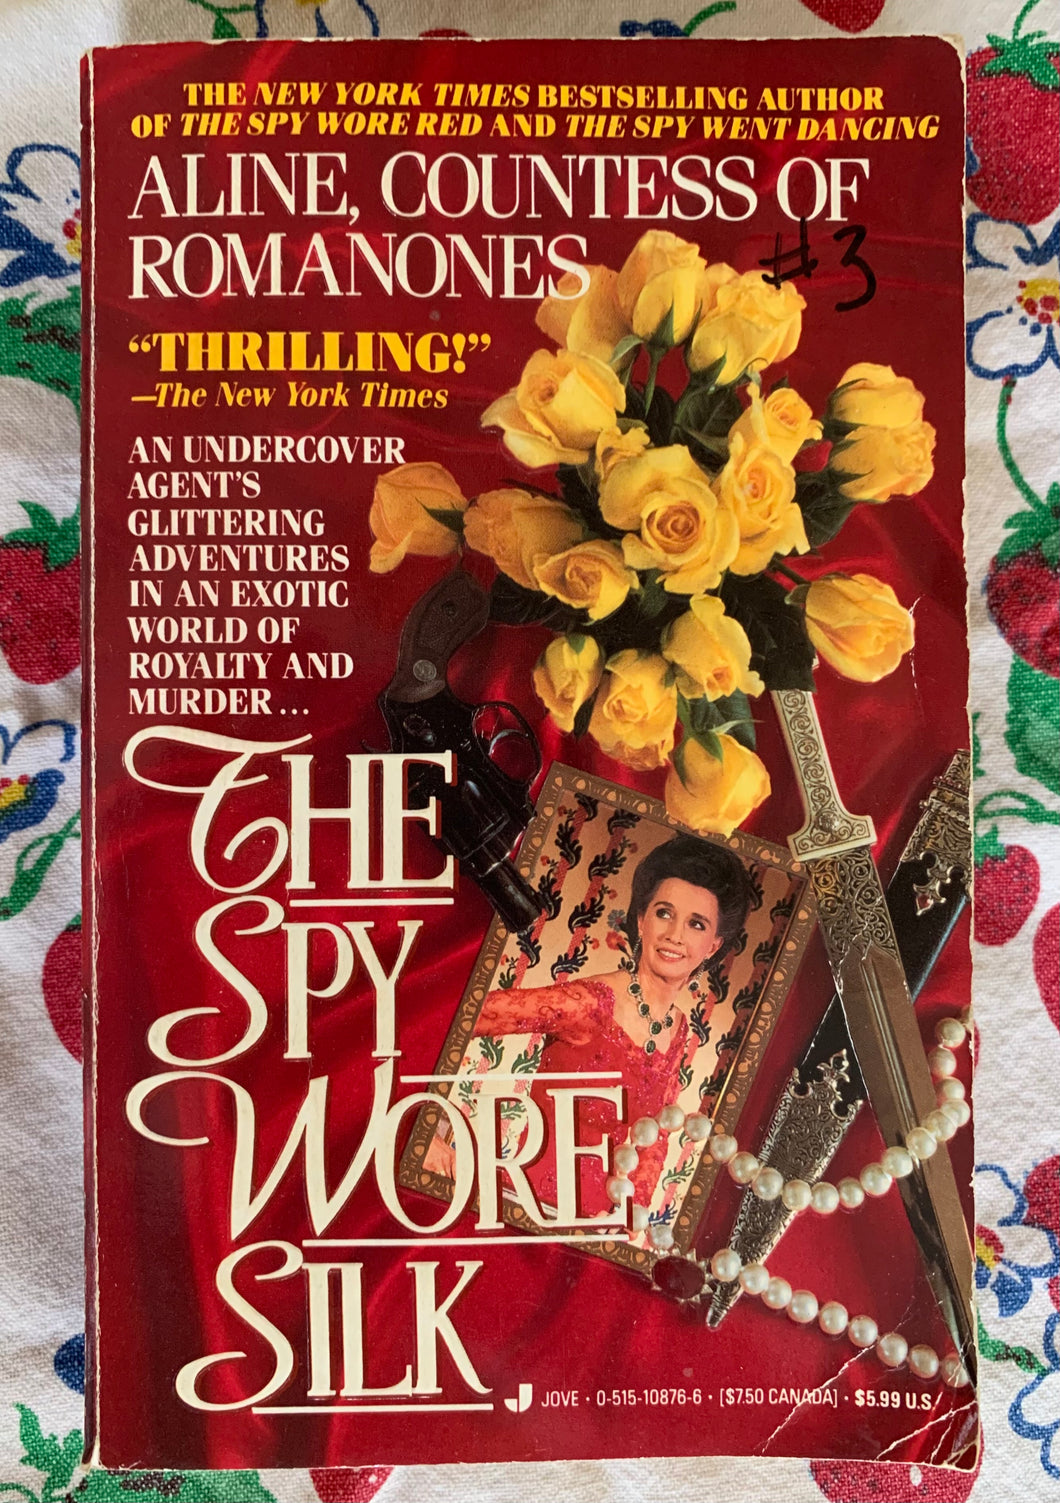 The Spy Wore Silk: An Undercover Agent's Glittering Adventures in an Exotic World of Royalty and Murder...